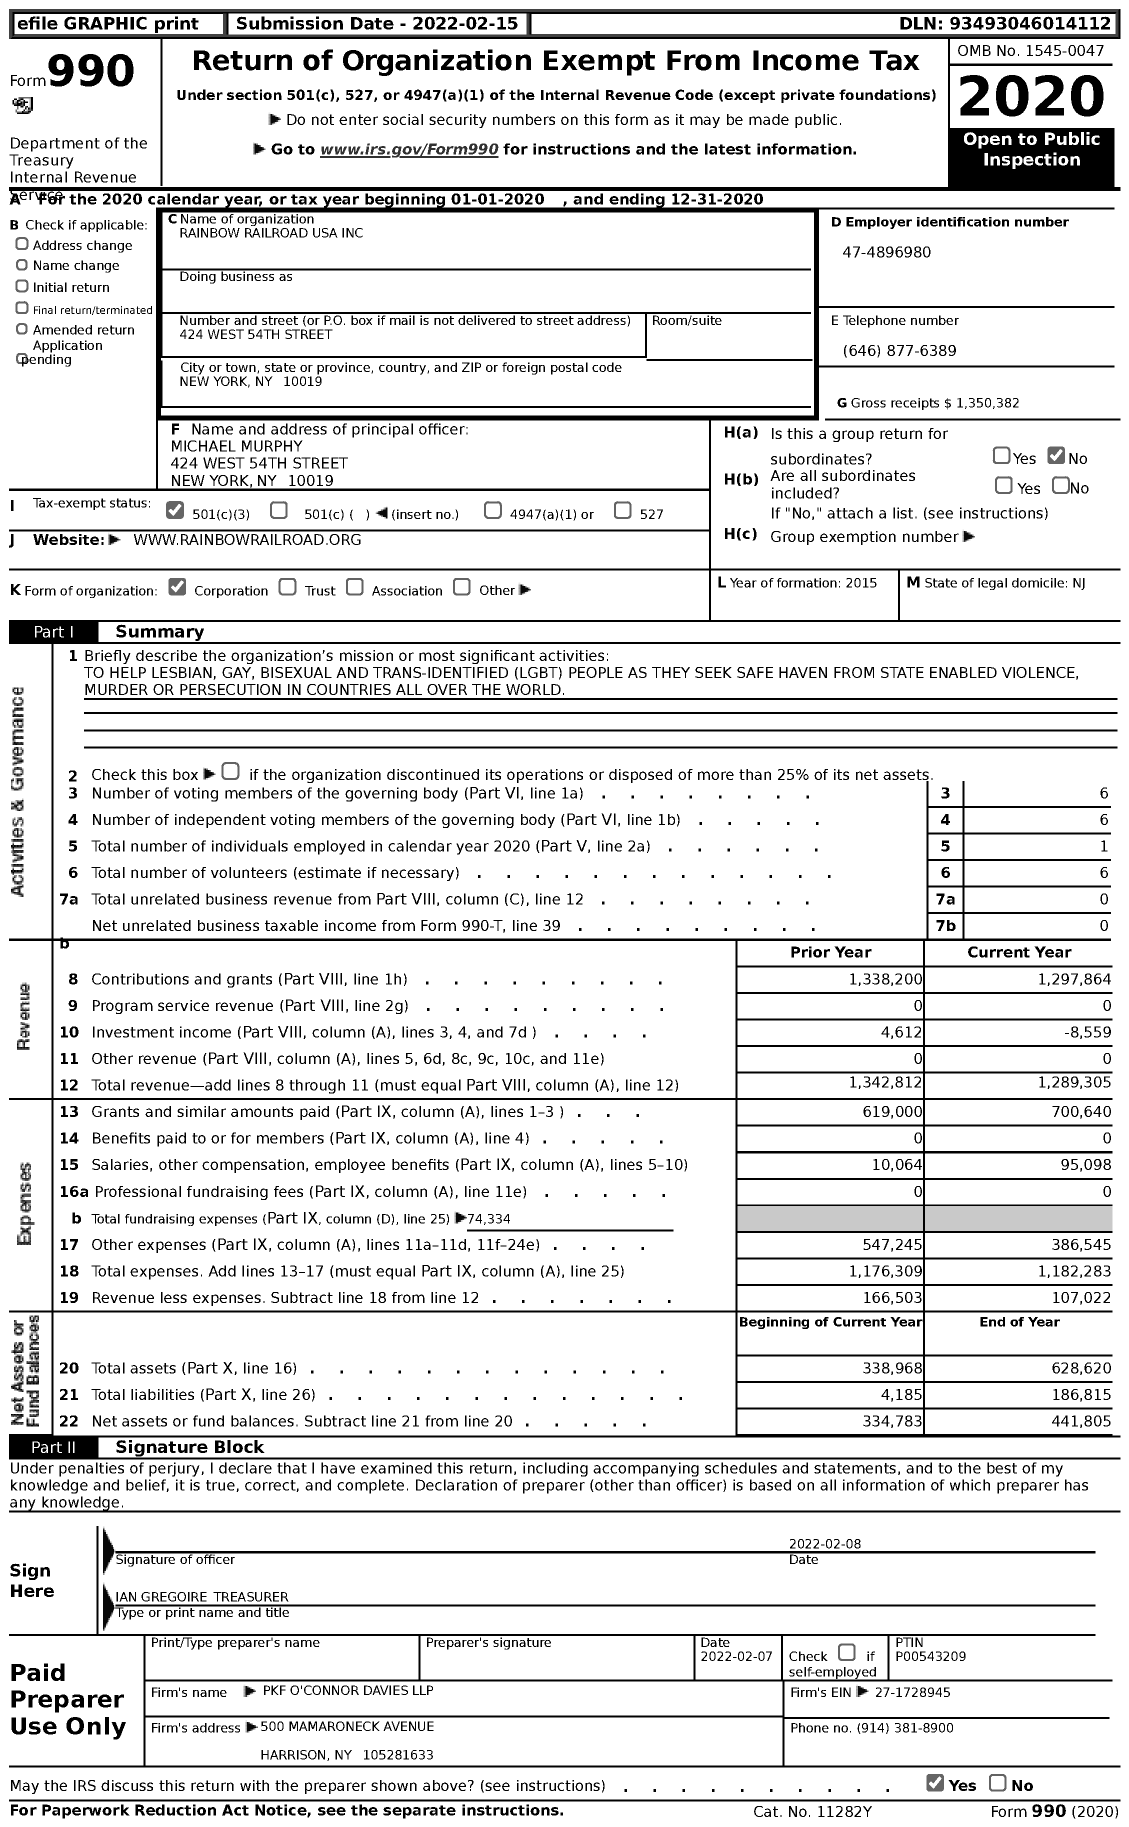 Image of first page of 2020 Form 990 for Rainbow Railroad USA